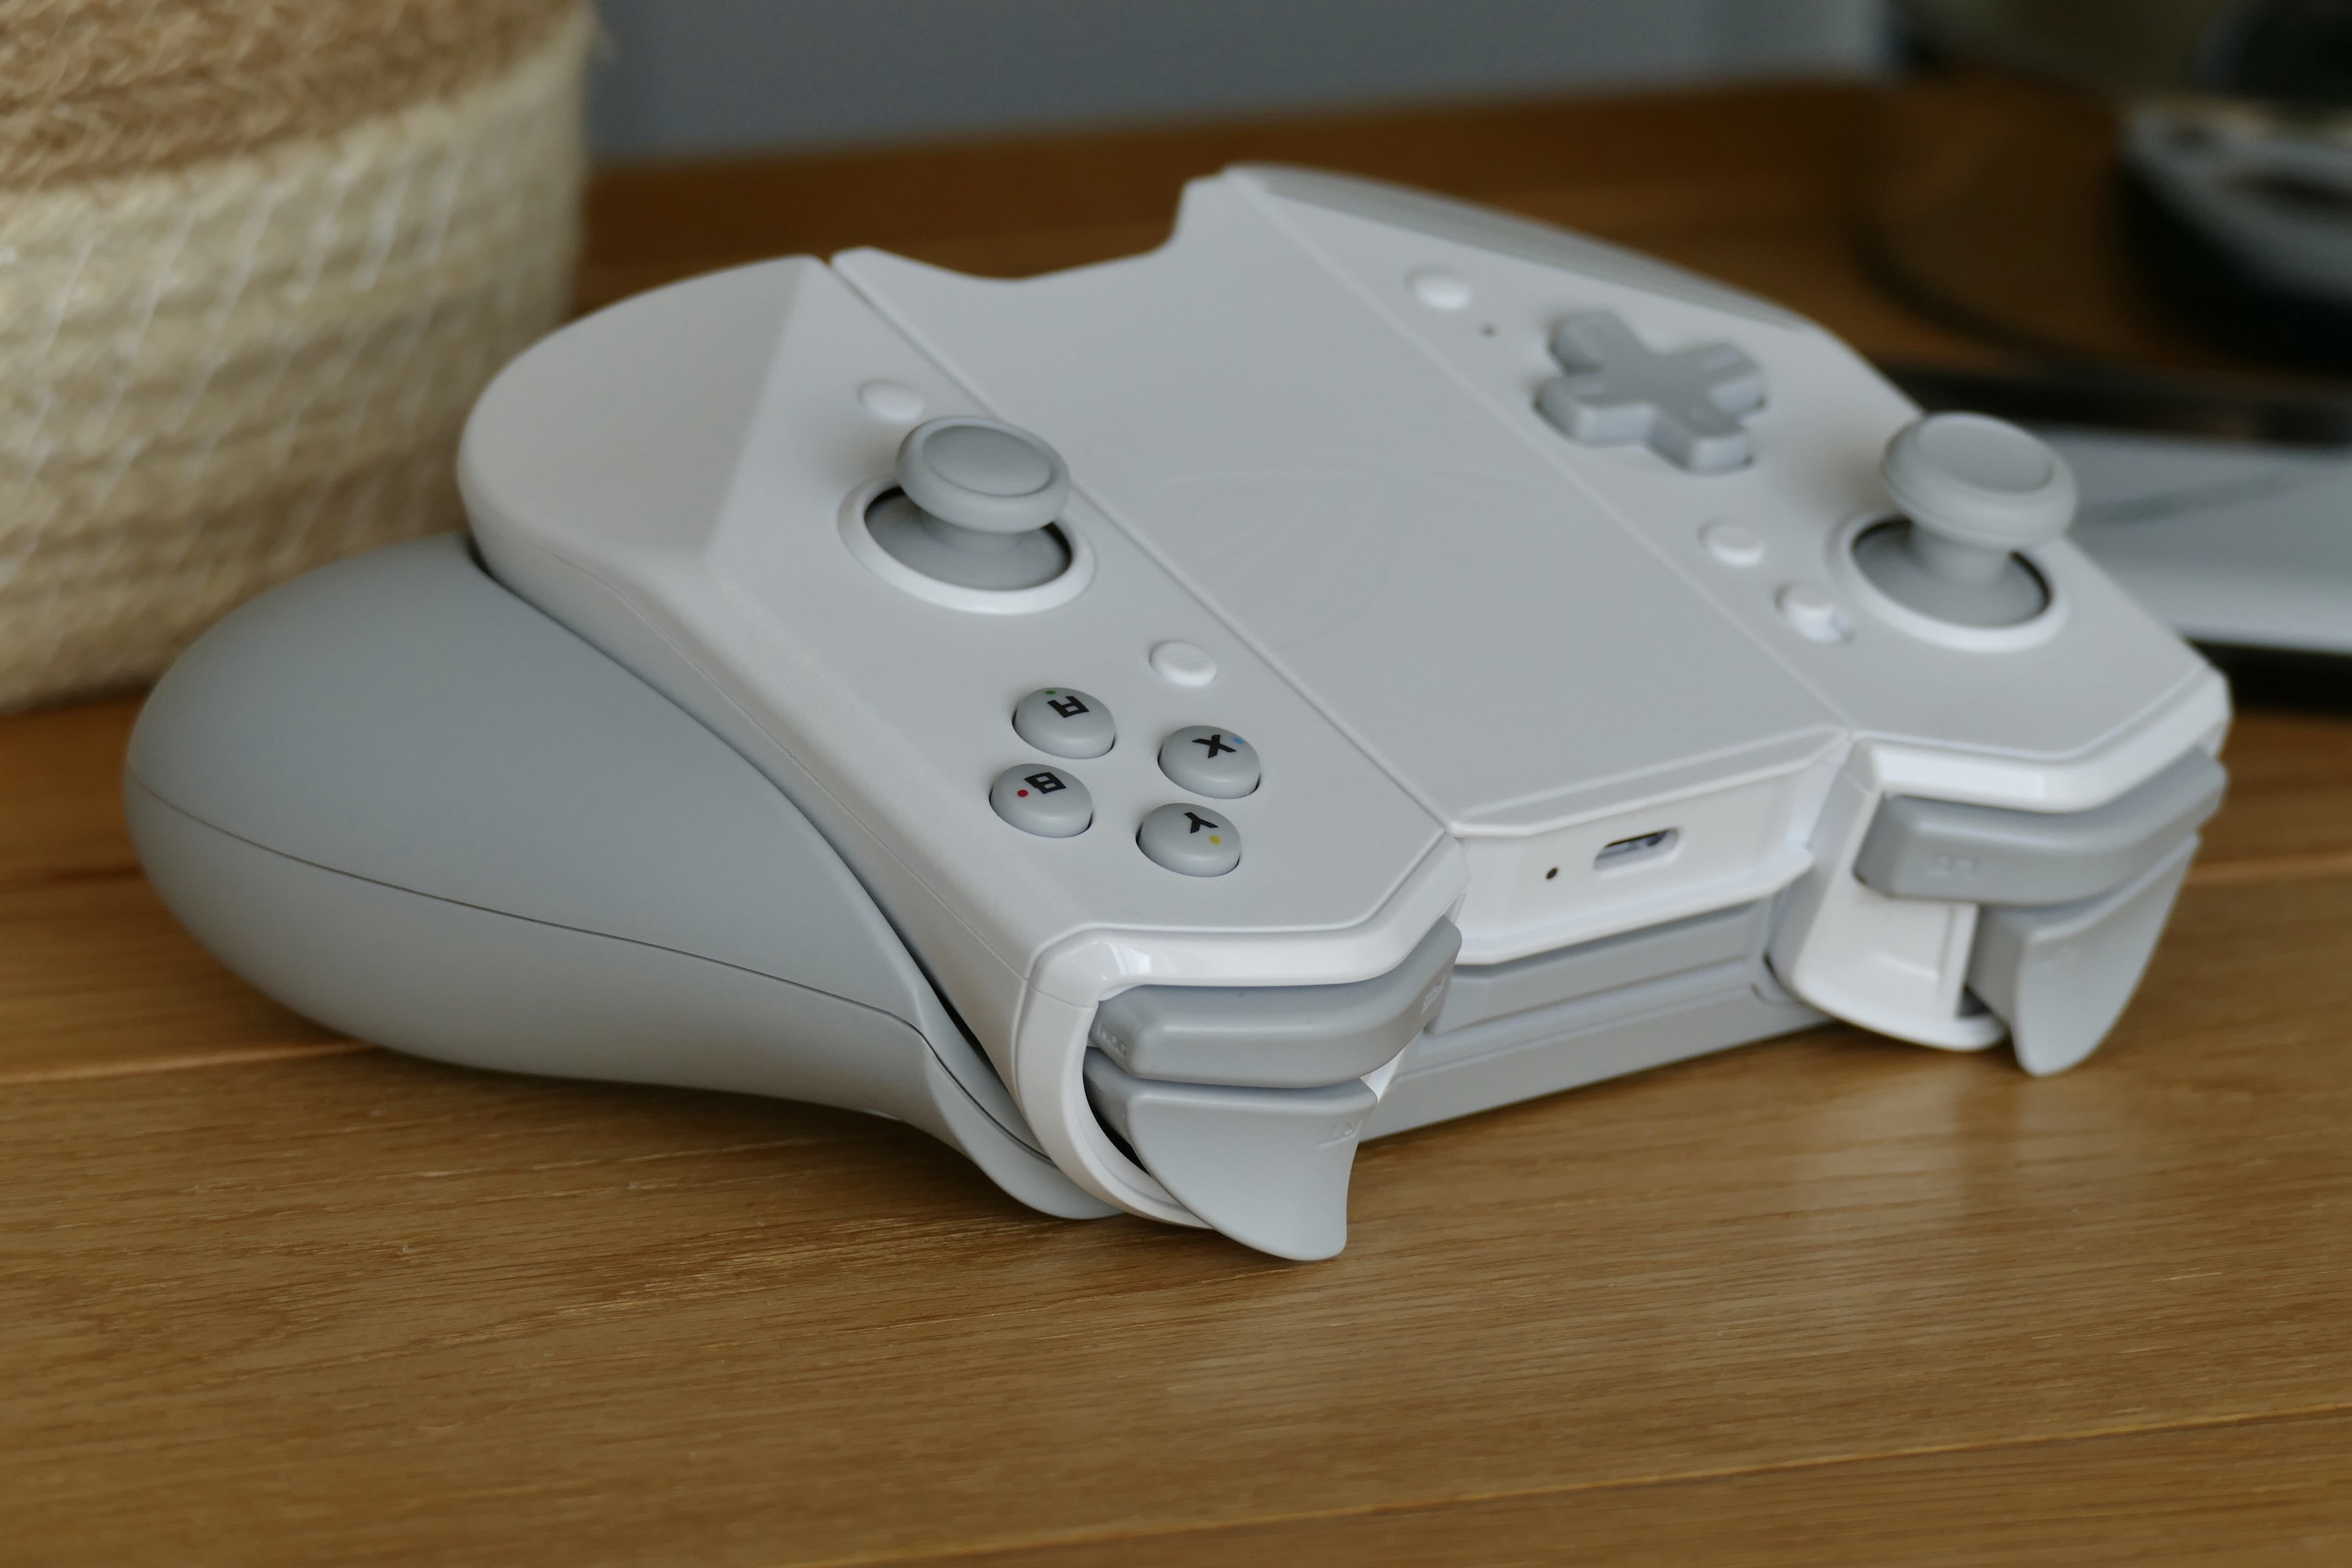 The side of the Kunai 3 controller.